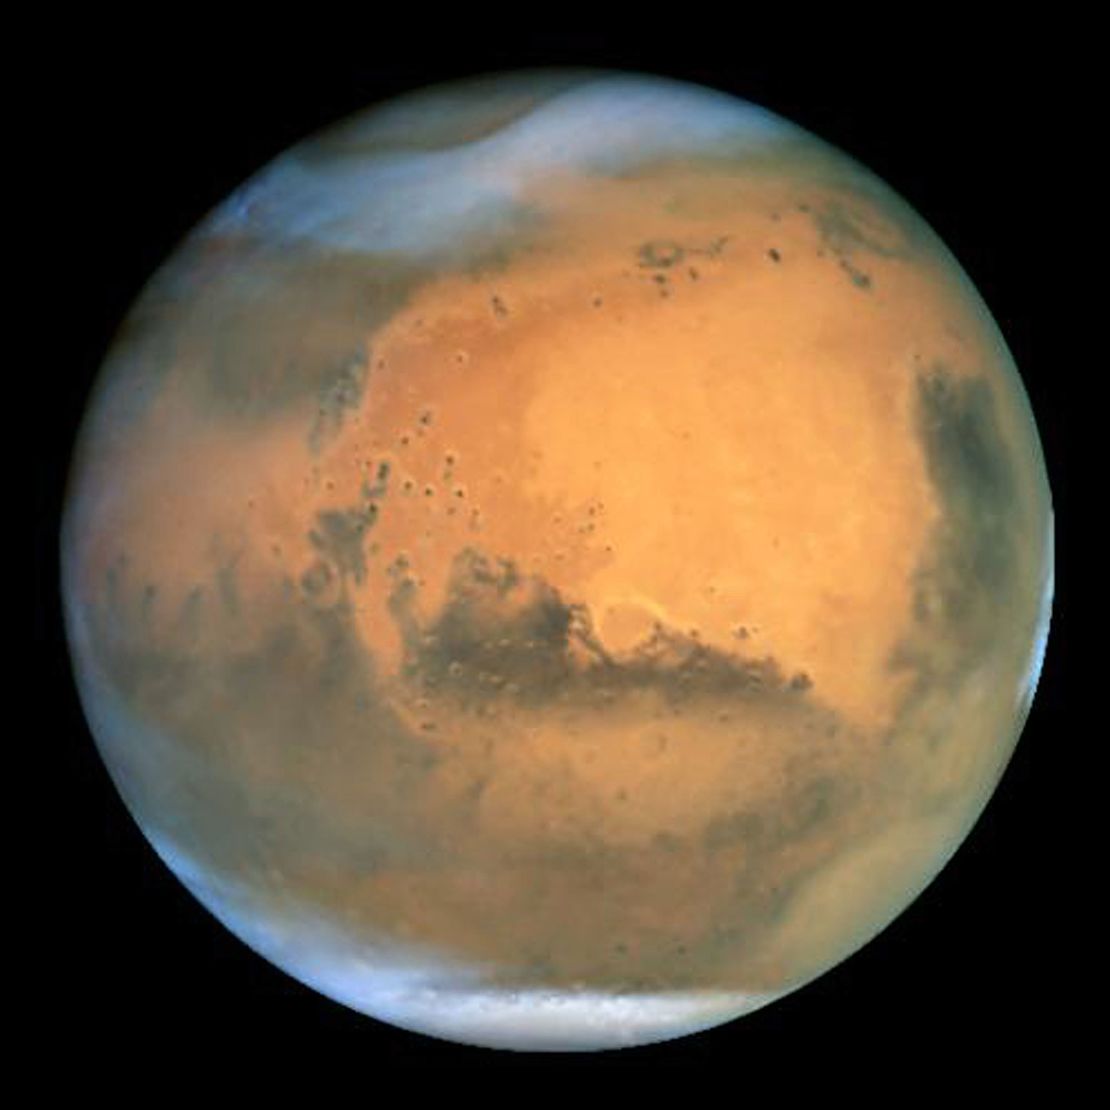 NASA's Earth-orbiting Hubble Space Telescope took this picture of Mars in 2003.